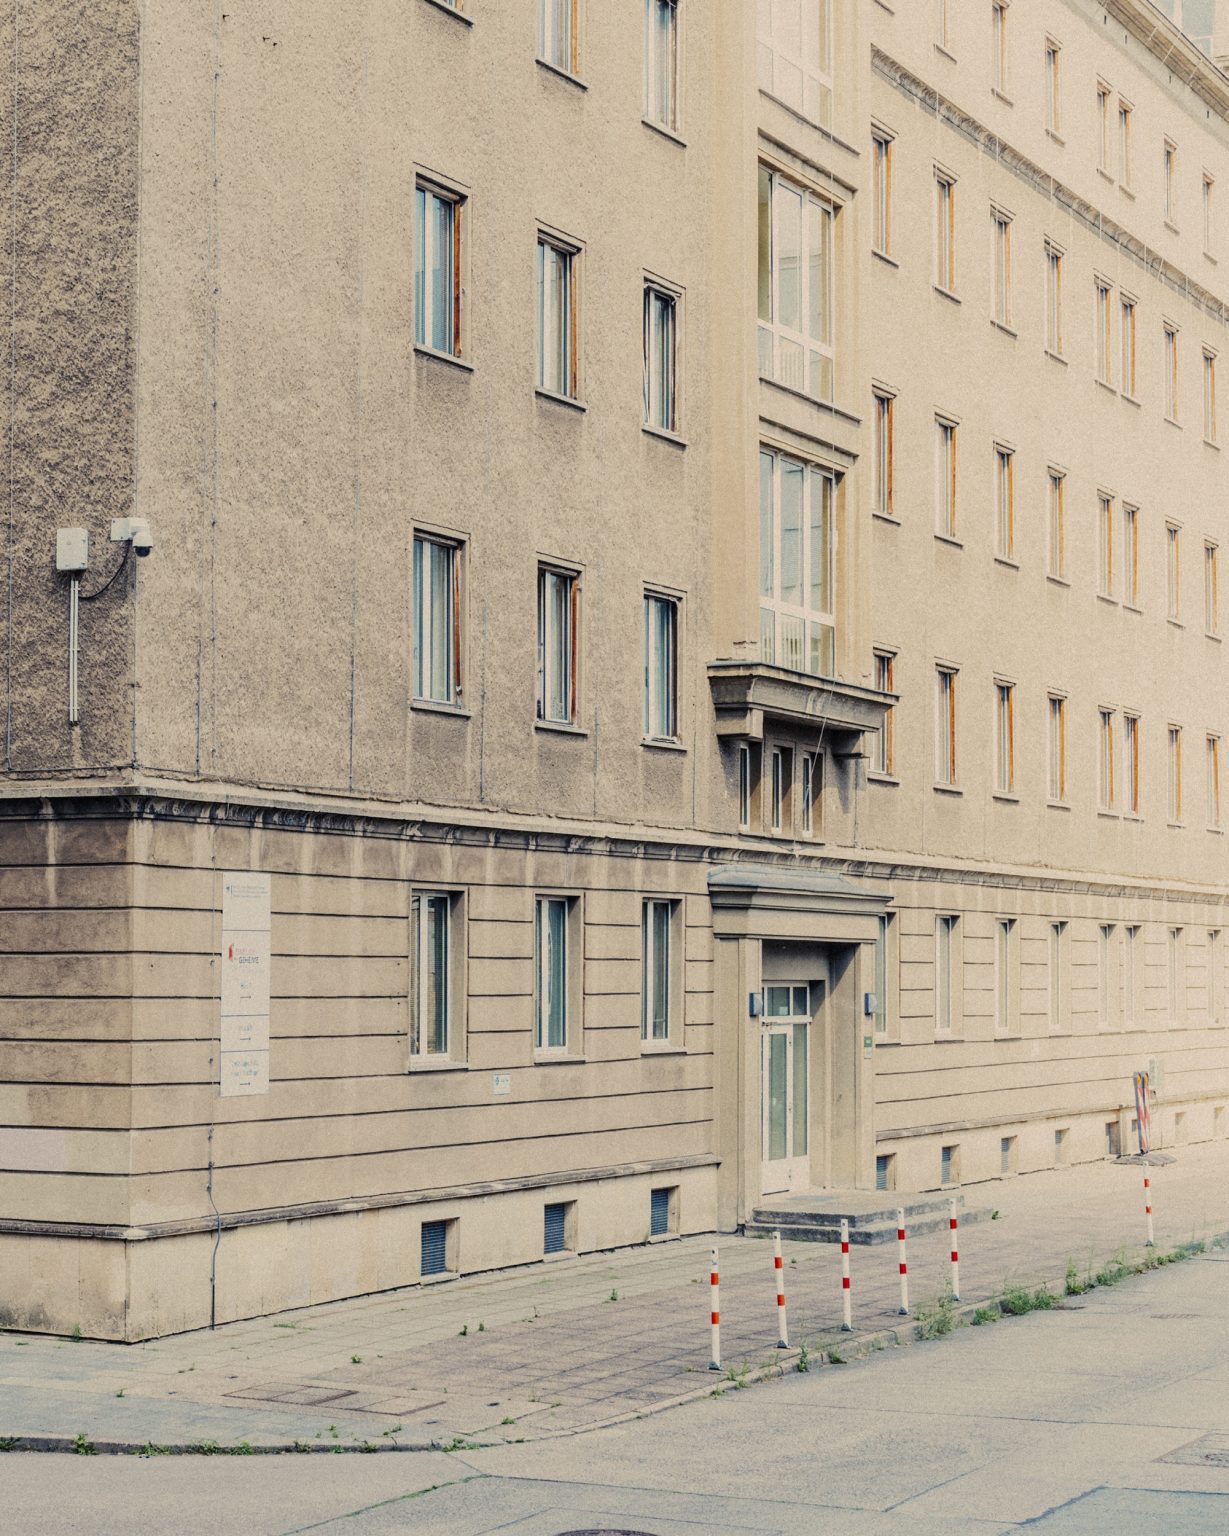 Outside the Stasi Records Archive, the same building that once housed the Stasi headquarters, in Berlin, July 16, 2021. Researchers are working to reassemble, scrap by scrap, some 40 to 55 million pieces of paper that were torn up and stuffed into sacks by the East German secret police in the final days of the German Democratic Republic. (Mustafah Abdulaziz/The New York Times)     <span style="color: #ff0000">*** SPECIAL   FEE   APPLIES ***</span> *** Local Caption *** 16.15556745